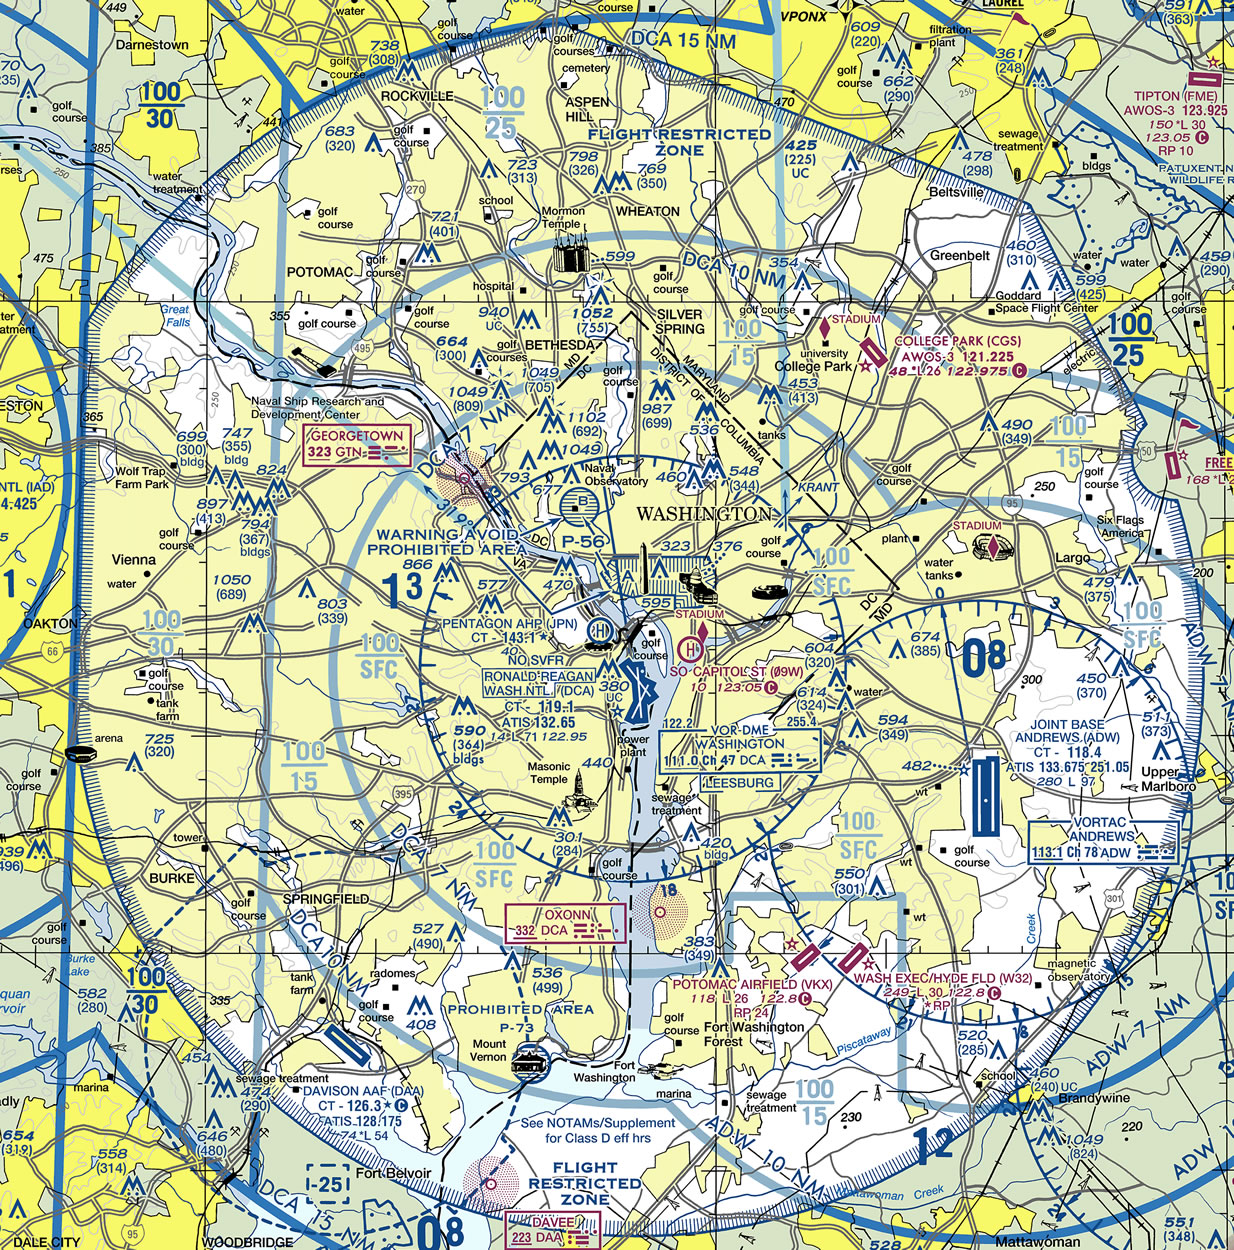 The Washington DC Terminal Area Chart for manned VFR flight